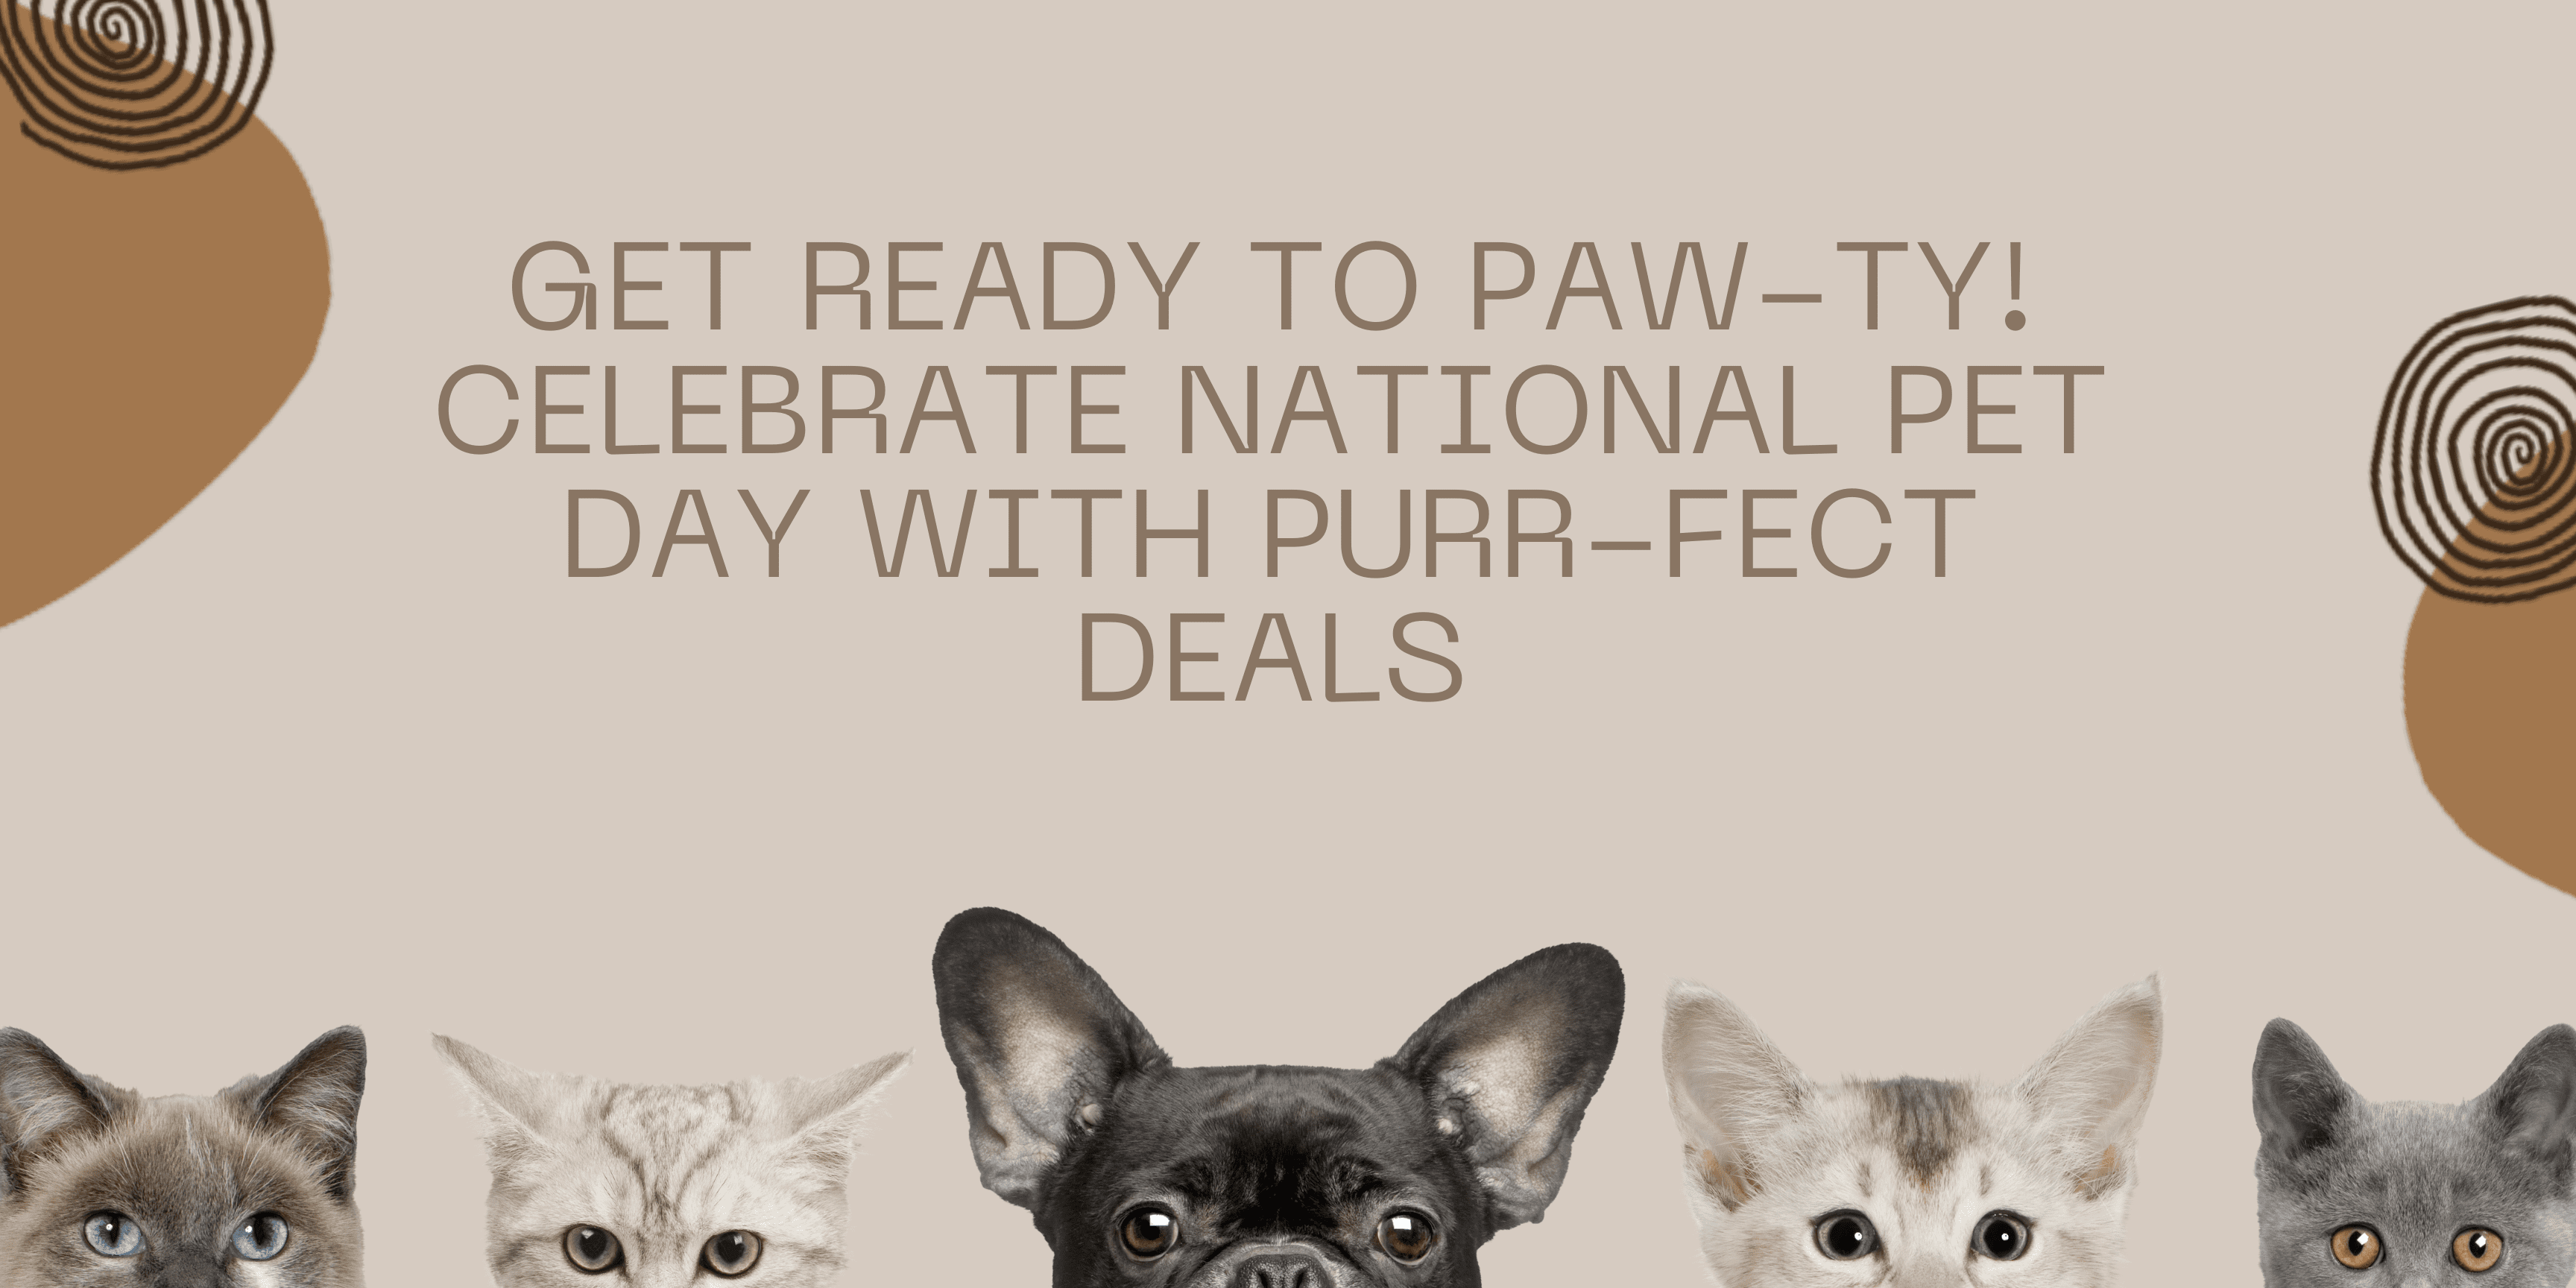 Get ready to PAW-ty! Celebrate National Pet Day with purr-fect deals